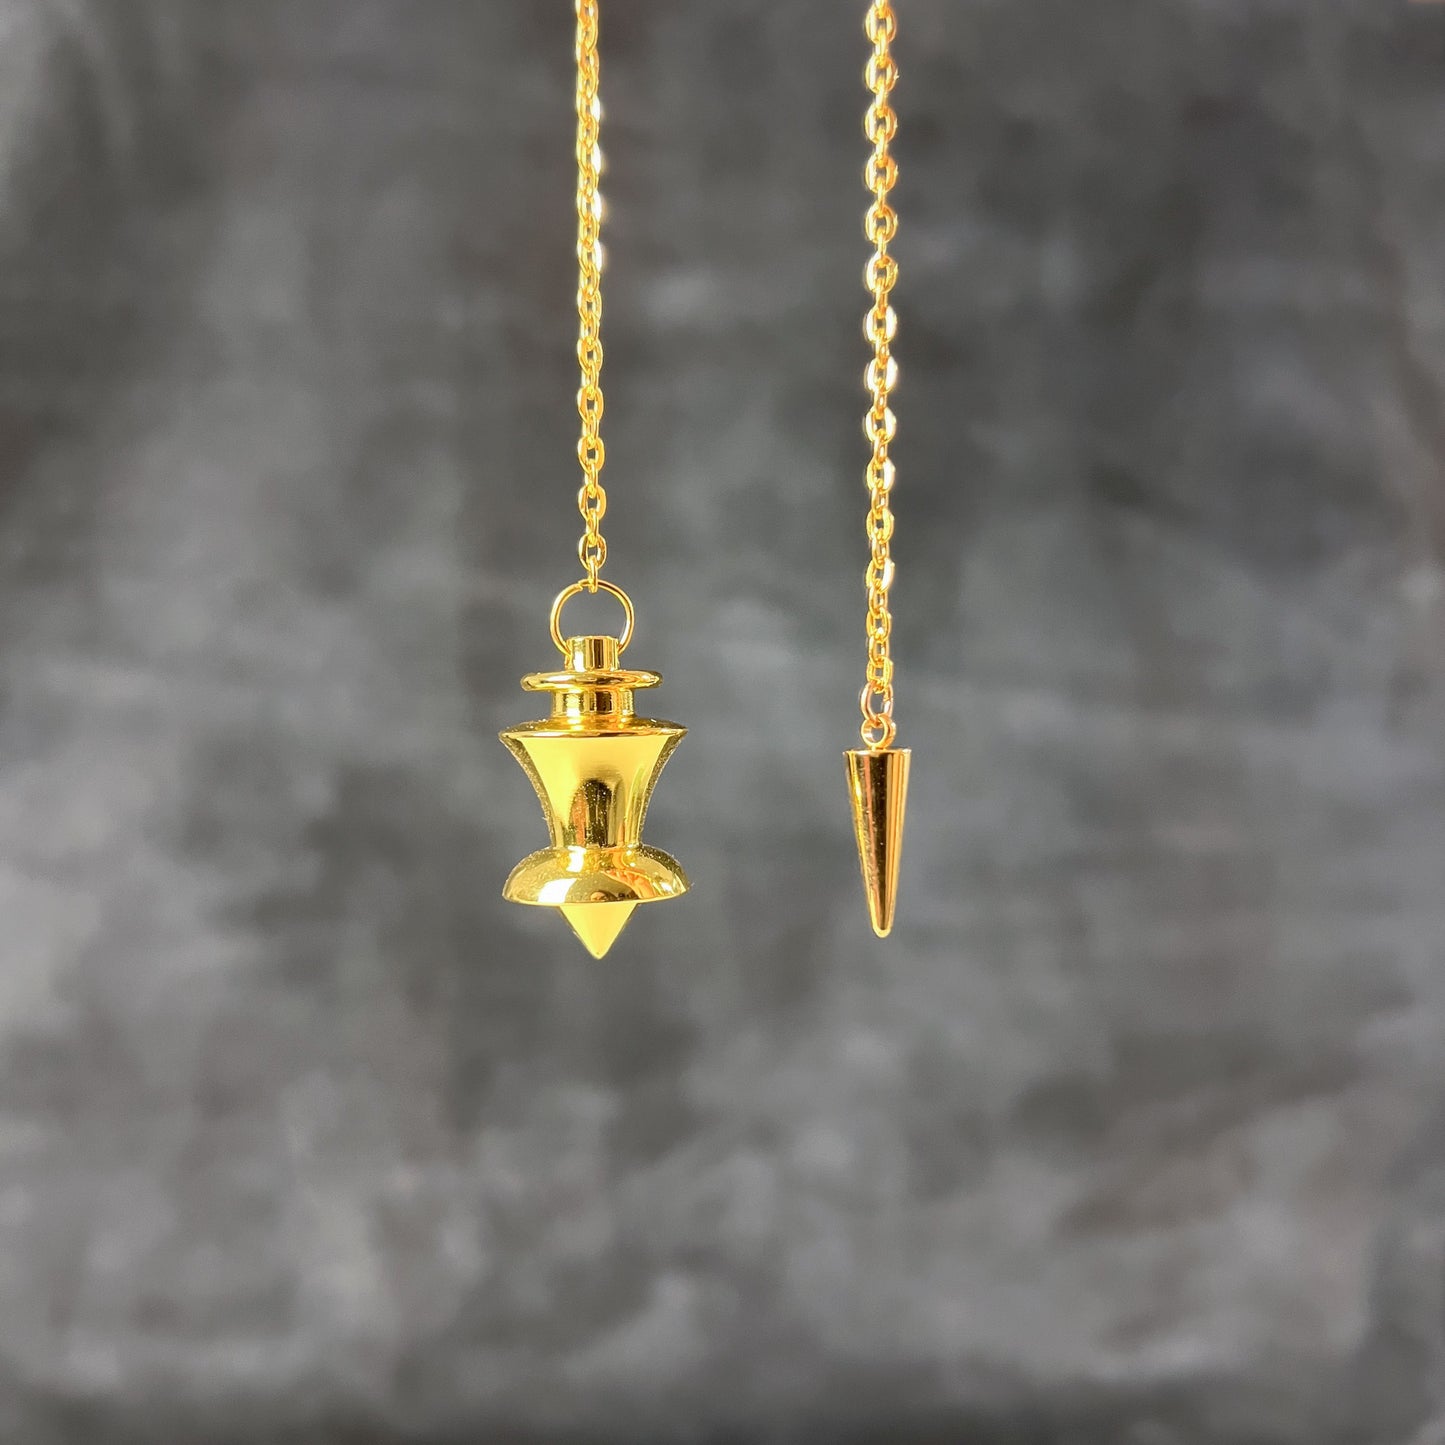 Golden point and dome dowsing metal pendulum with a spike charm Baguette Magick